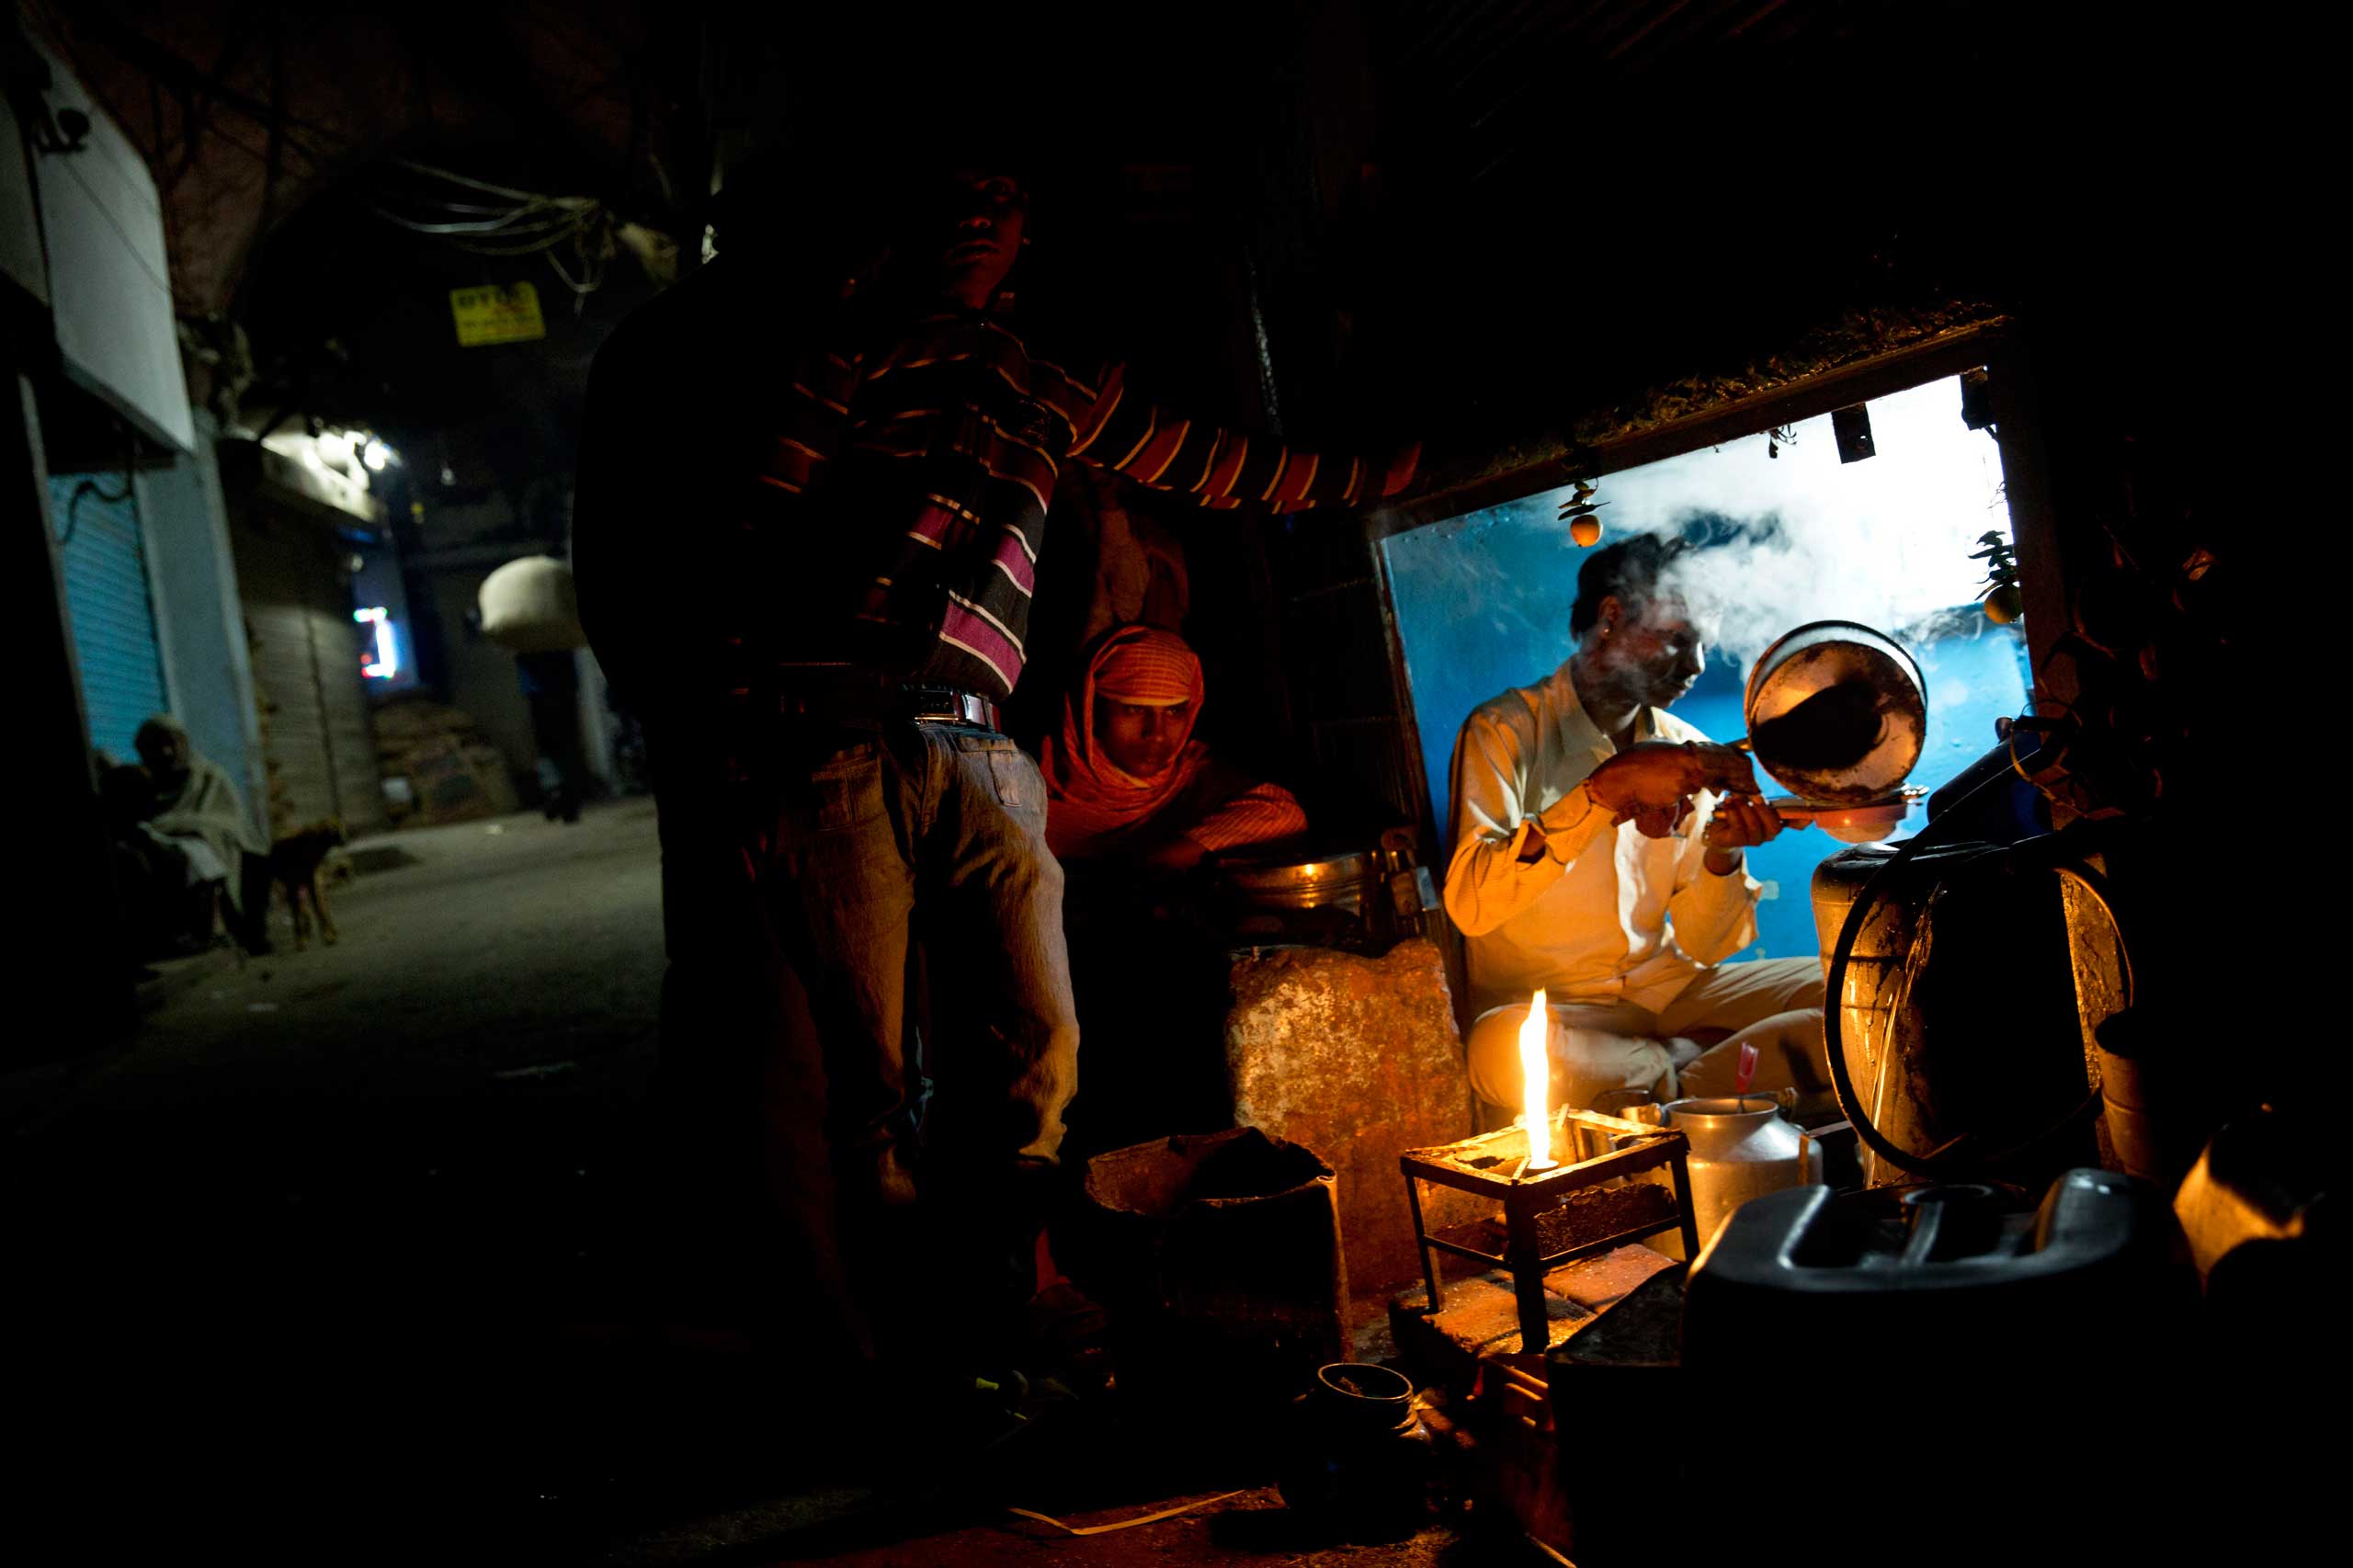 Feb. 11, 2015. A tea seller prepares tea for laborers in the old city area of New Delhi. India is the second largest tea producer in the world and the drink is the most popular hot beverage in the country.